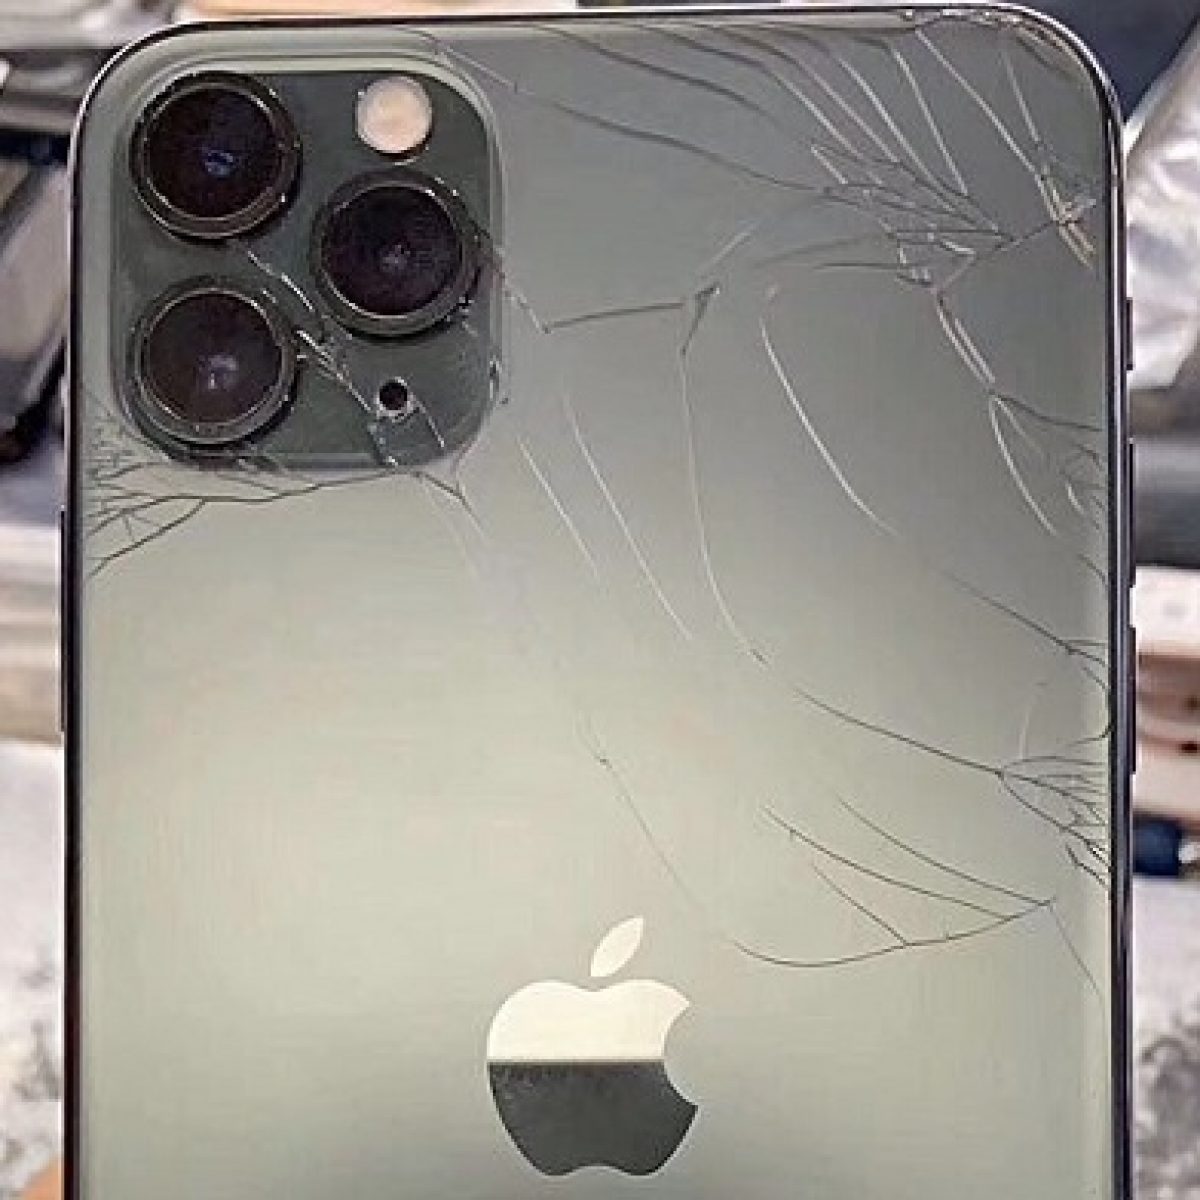 How Much Doeshow Much Does The Screen Replacement Of An Iphone 11 Iphone 11 Pro And 11 Pro Max Cost